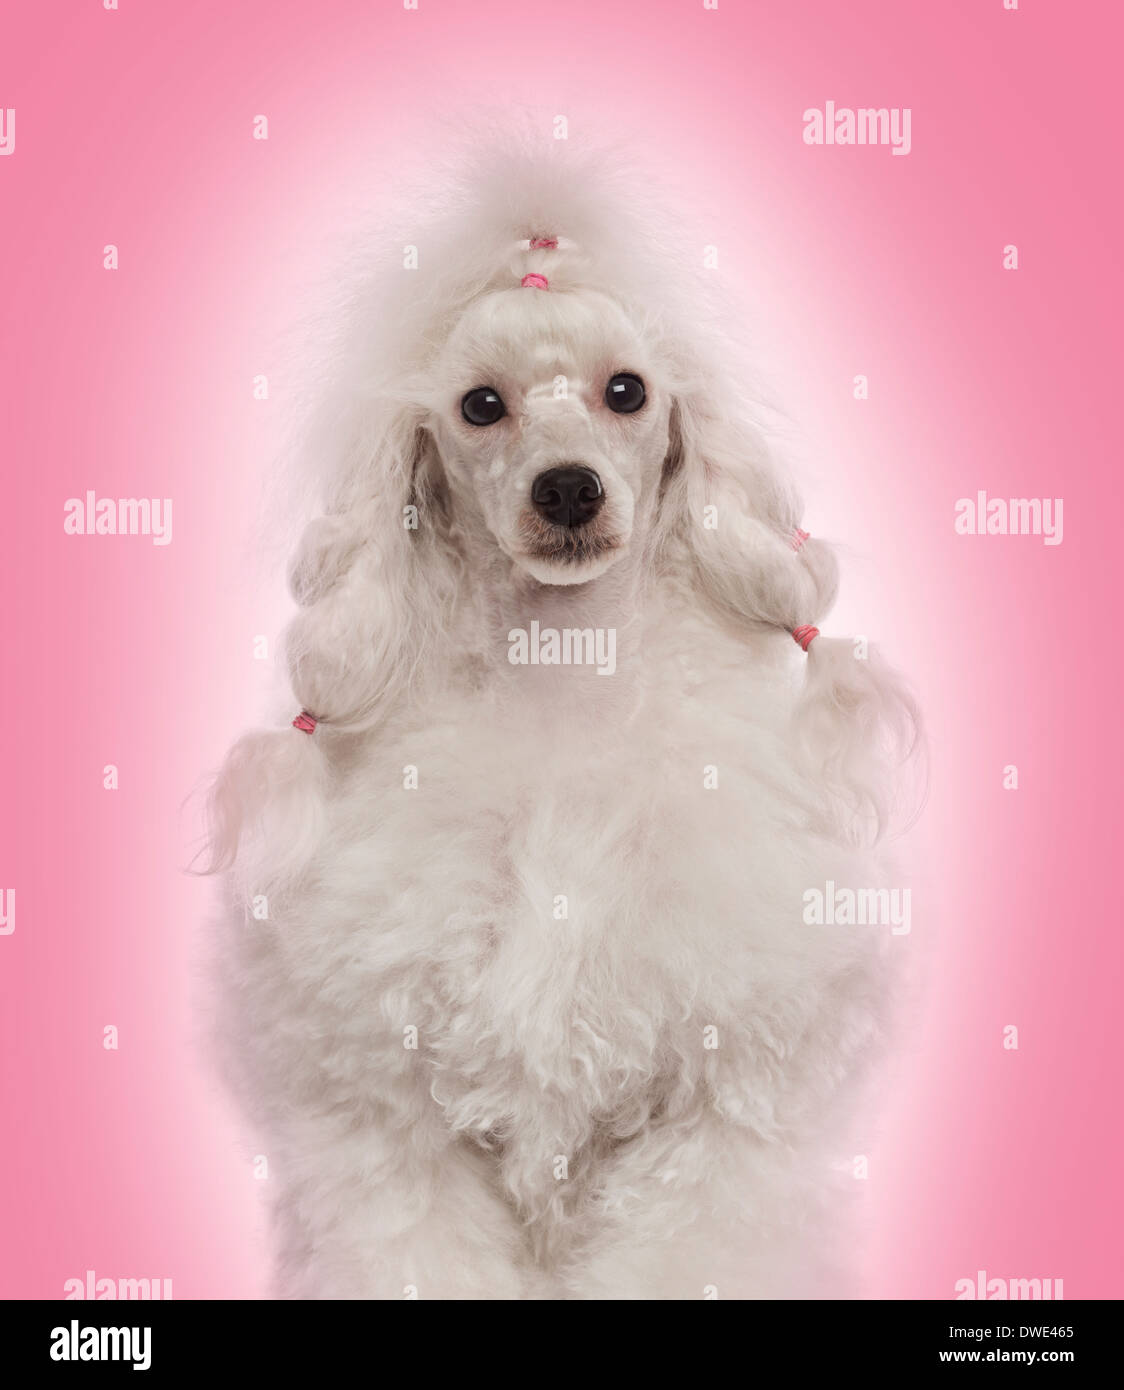 Close-up of a Poodle facing the camera, on a gradient pink background Stock Photo